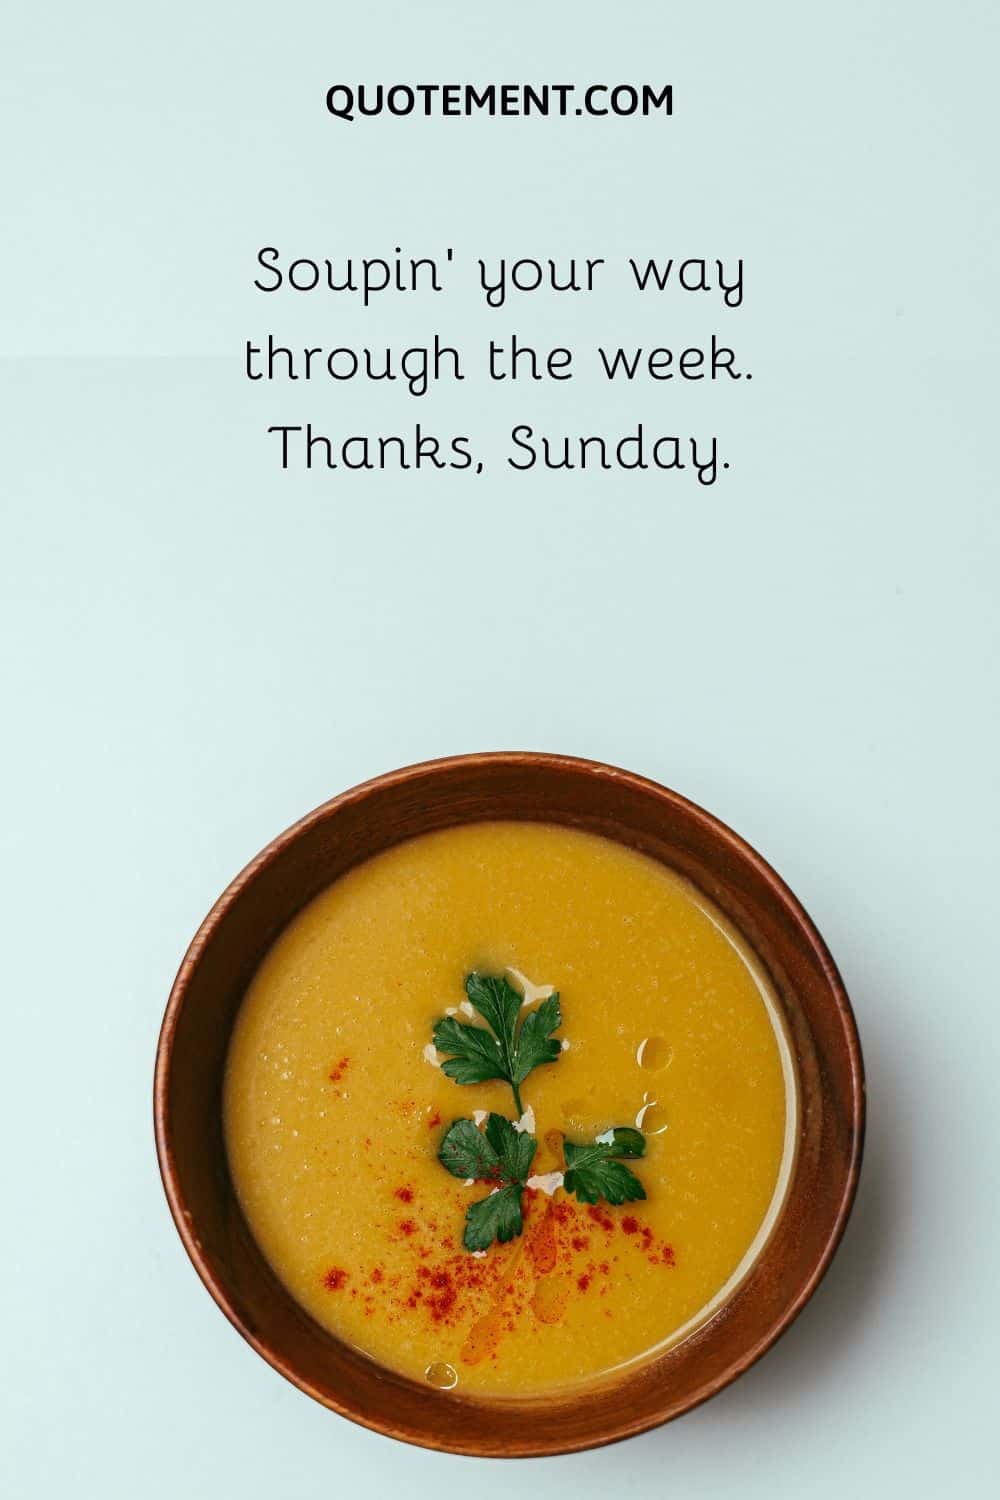 Soupin’ your way through the week.